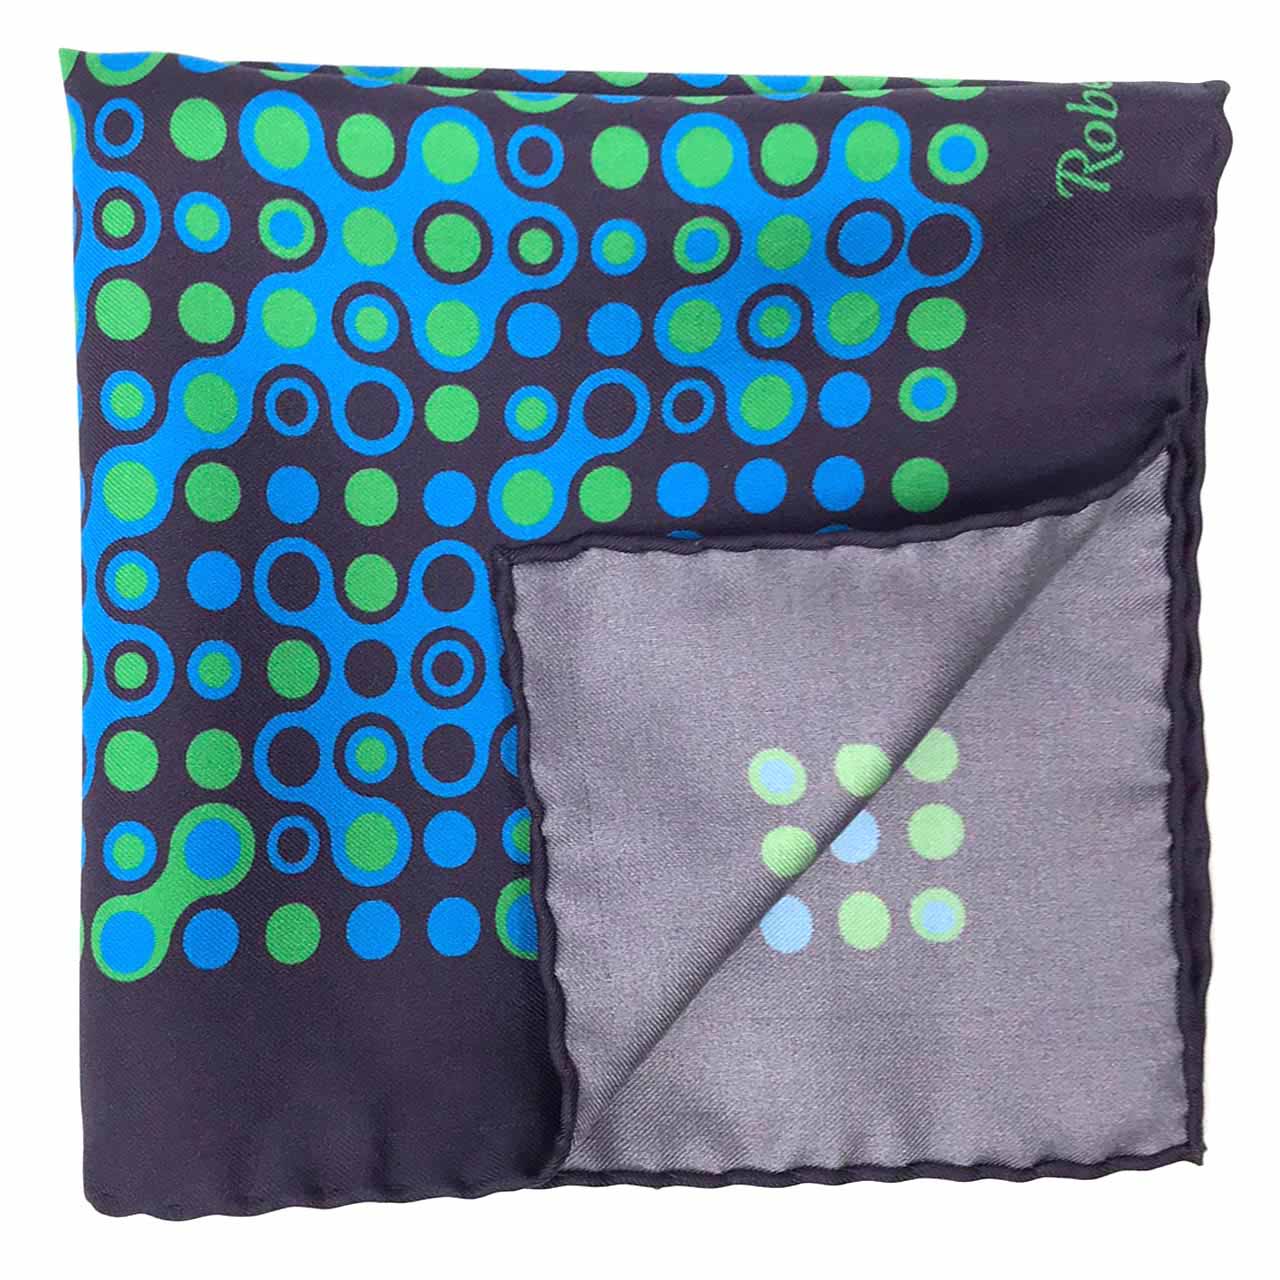 The Code Turquoise Pocket Square